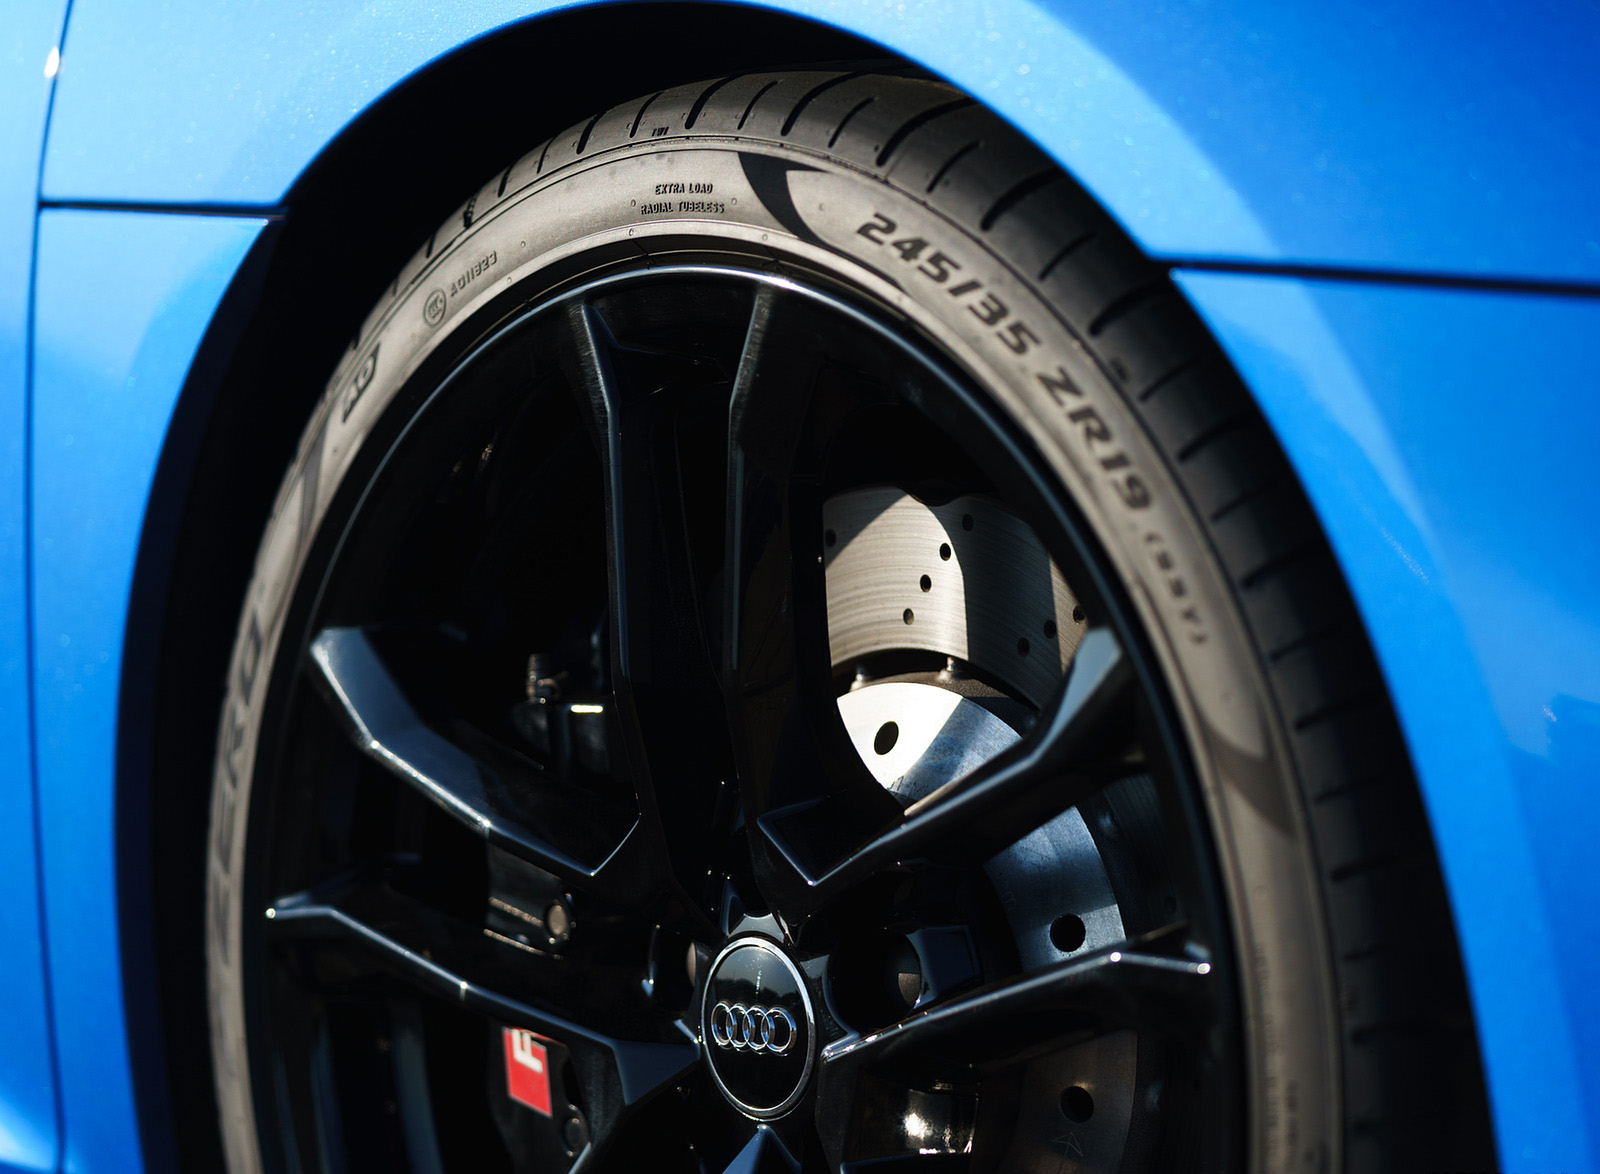 2020 Audi R8 V10 RWD Coupe (UK-Spec) Wheel Wallpapers #101 of 151